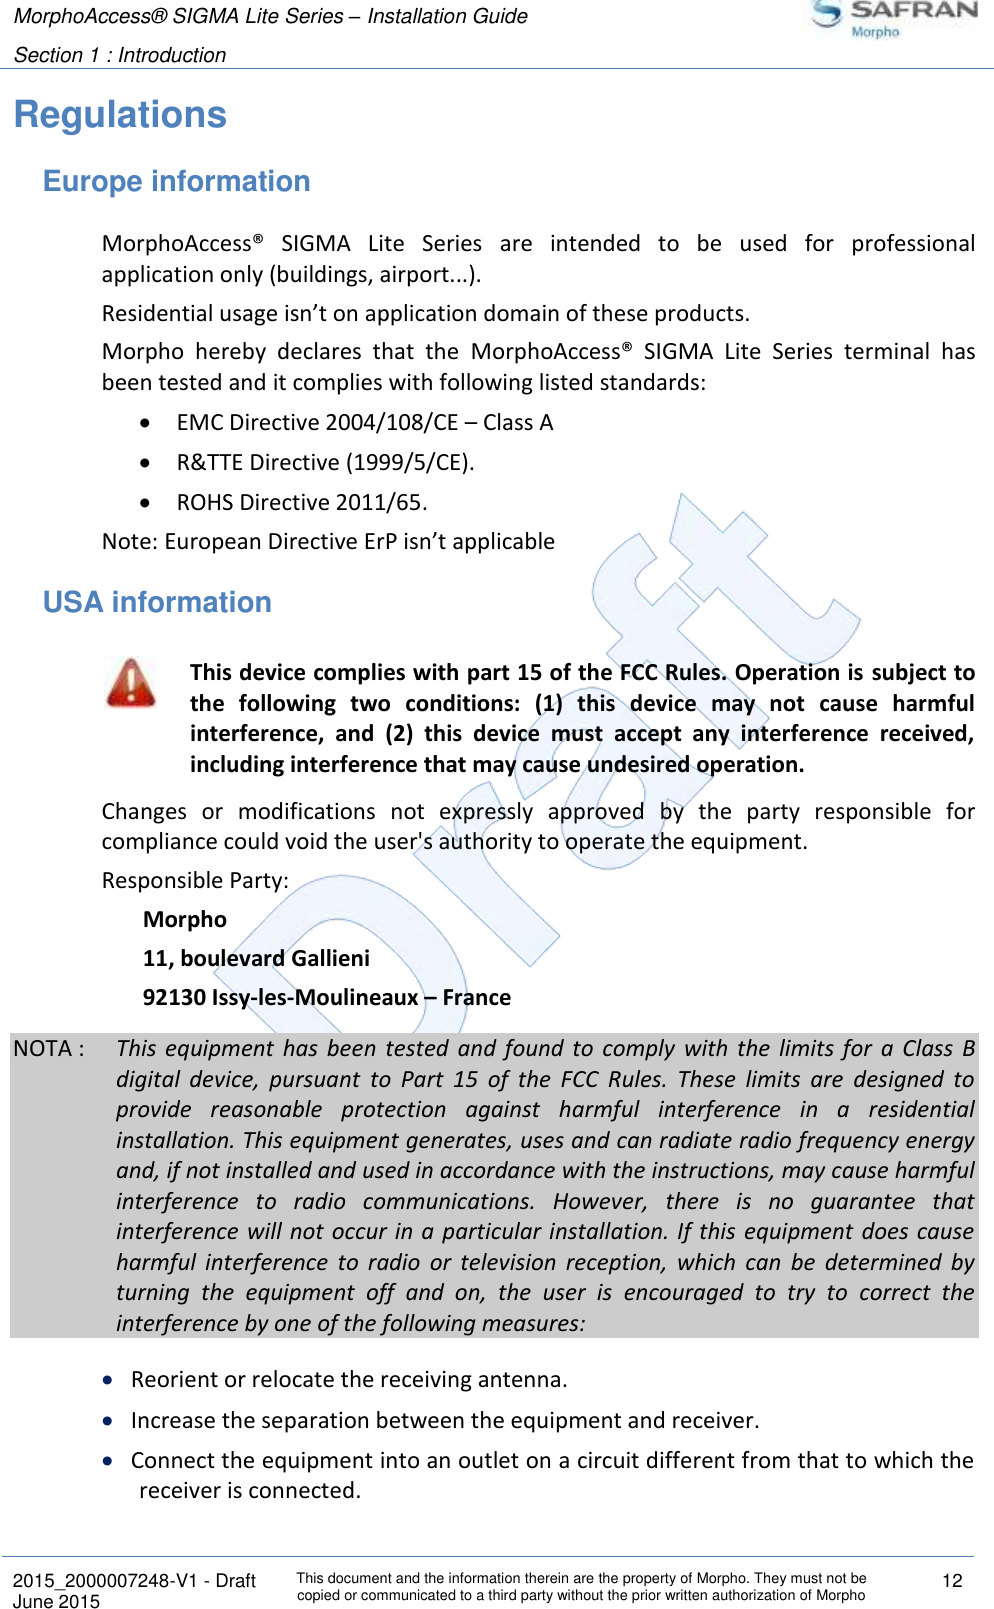 MorphoAccess® SIGMA Lite Series – Installation Guide  Section 1 : Introduction   2015_2000007248-V1 - Draft This document and the information therein are the property of Morpho. They must not be copied or communicated to a third party without the prior written authorization of Morpho 12 June 2015   Regulations Europe information MorphoAccess®  SIGMA  Lite  Series  are  intended  to  be  used  for  professional application only (buildings, airport...). Residential usage isn’t on application domain of these products. Morpho  hereby  declares  that  the  MorphoAccess®  SIGMA  Lite  Series  terminal  has been tested and it complies with following listed standards:  EMC Directive 2004/108/CE – Class A  R&amp;TTE Directive (1999/5/CE).  ROHS Directive 2011/65. Note: European Directive ErP isn’t applicable  USA information  This device complies with part 15 of the FCC Rules. Operation is  subject to the  following  two  conditions:  (1)  this  device  may  not  cause  harmful interference,  and  (2)  this  device  must  accept  any  interference  received, including interference that may cause undesired operation. Changes  or  modifications  not  expressly  approved  by  the  party  responsible  for compliance could void the user&apos;s authority to operate the equipment. Responsible Party: Morpho 11, boulevard Gallieni 92130 Issy-les-Moulineaux – France NOTA :  This  equipment  has  been  tested  and  found to  comply  with  the  limits  for  a  Class  B digital  device,  pursuant  to  Part  15  of  the  FCC  Rules.  These  limits  are  designed  to provide  reasonable  protection  against  harmful  interference  in  a  residential installation. This equipment generates, uses and can radiate radio frequency energy and, if not installed and used in accordance with the instructions, may cause harmful interference  to  radio  communications.  However,  there  is  no  guarantee  that interference will not occur in a particular installation. If this equipment does cause harmful  interference  to  radio  or  television  reception,  which  can  be  determined  by turning  the  equipment  off  and  on,  the  user  is  encouraged  to  try  to  correct  the interference by one of the following measures:  Reorient or relocate the receiving antenna.  Increase the separation between the equipment and receiver.  Connect the equipment into an outlet on a circuit different from that to which the receiver is connected. 